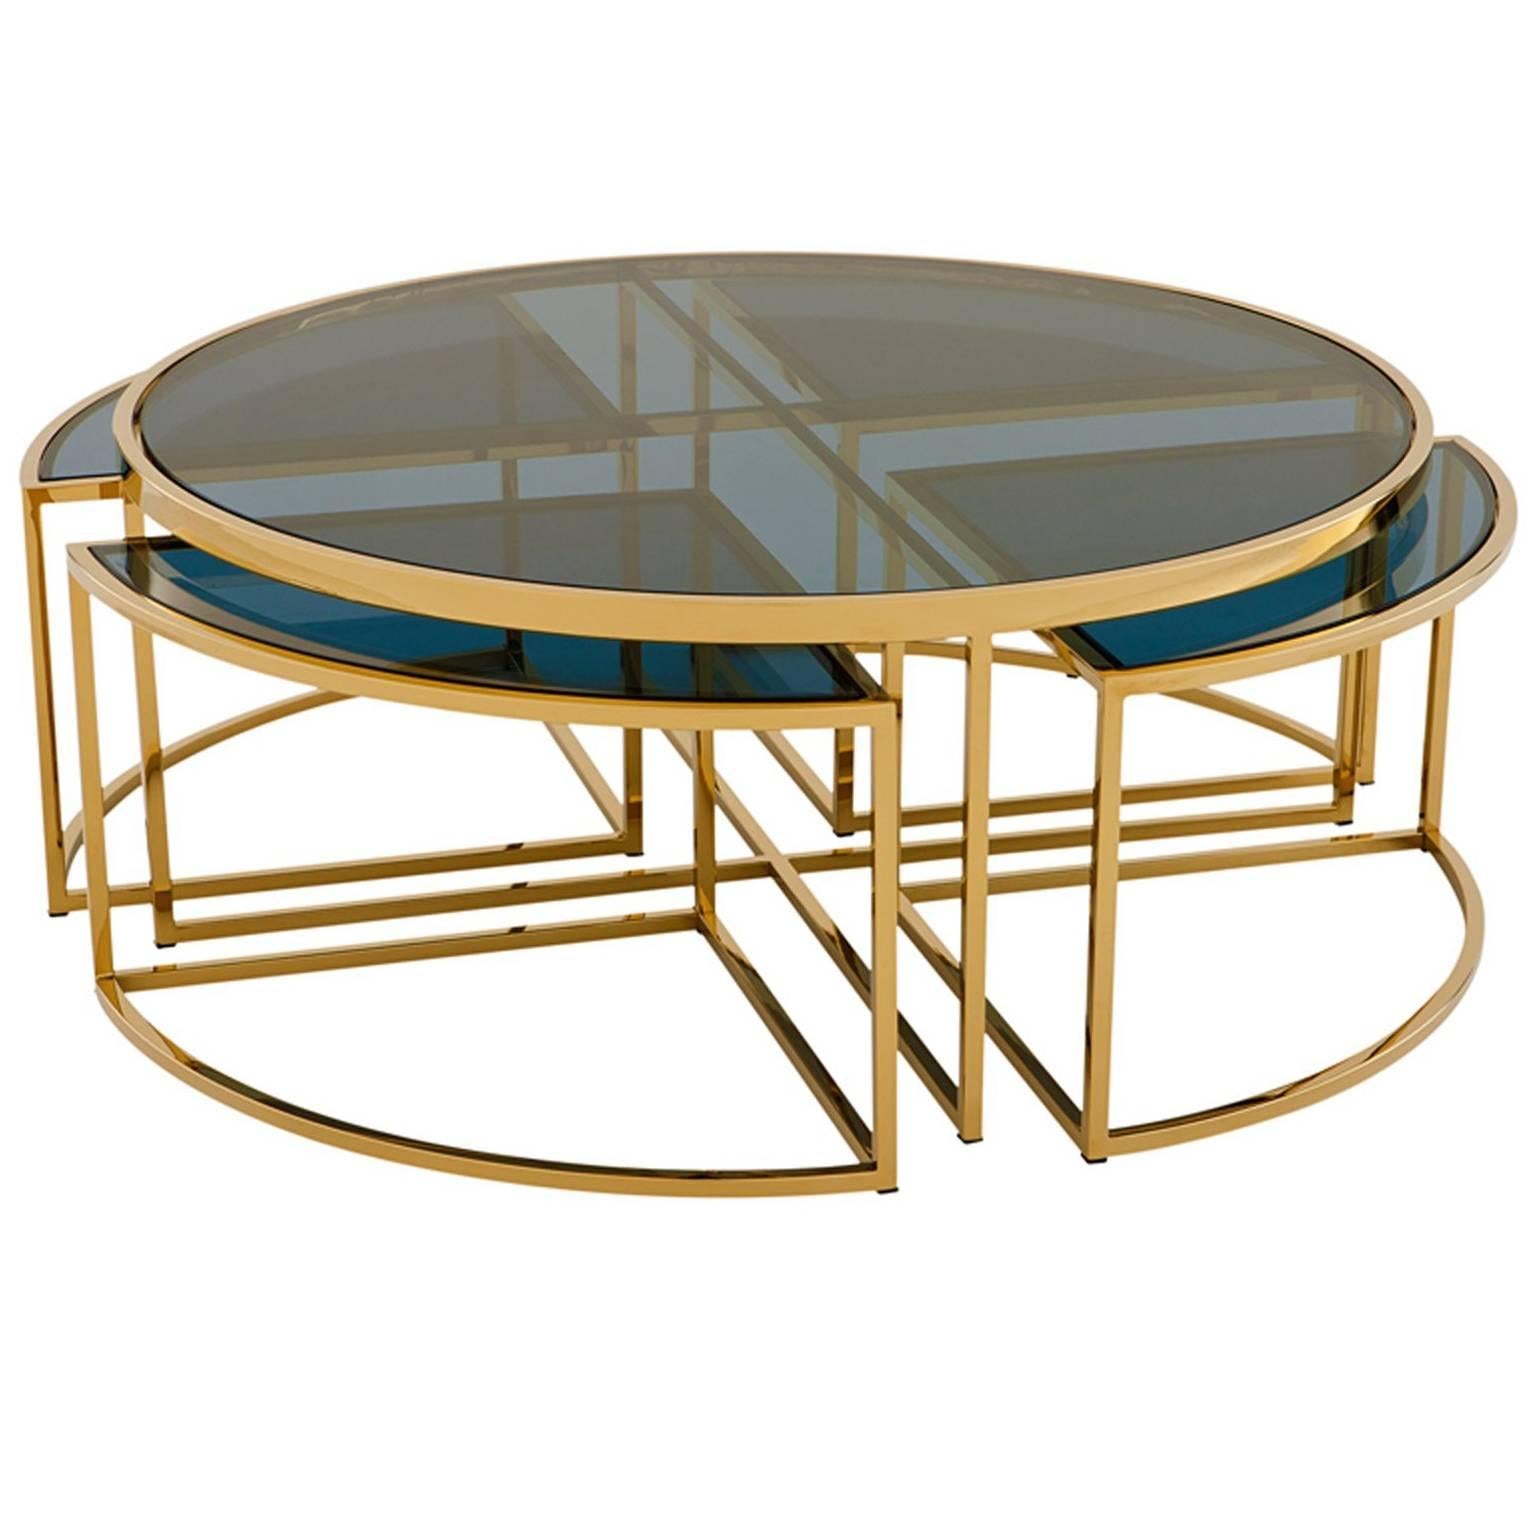 Four Pieces Coffee Table in Gold Finish or Polished Stainless Steel